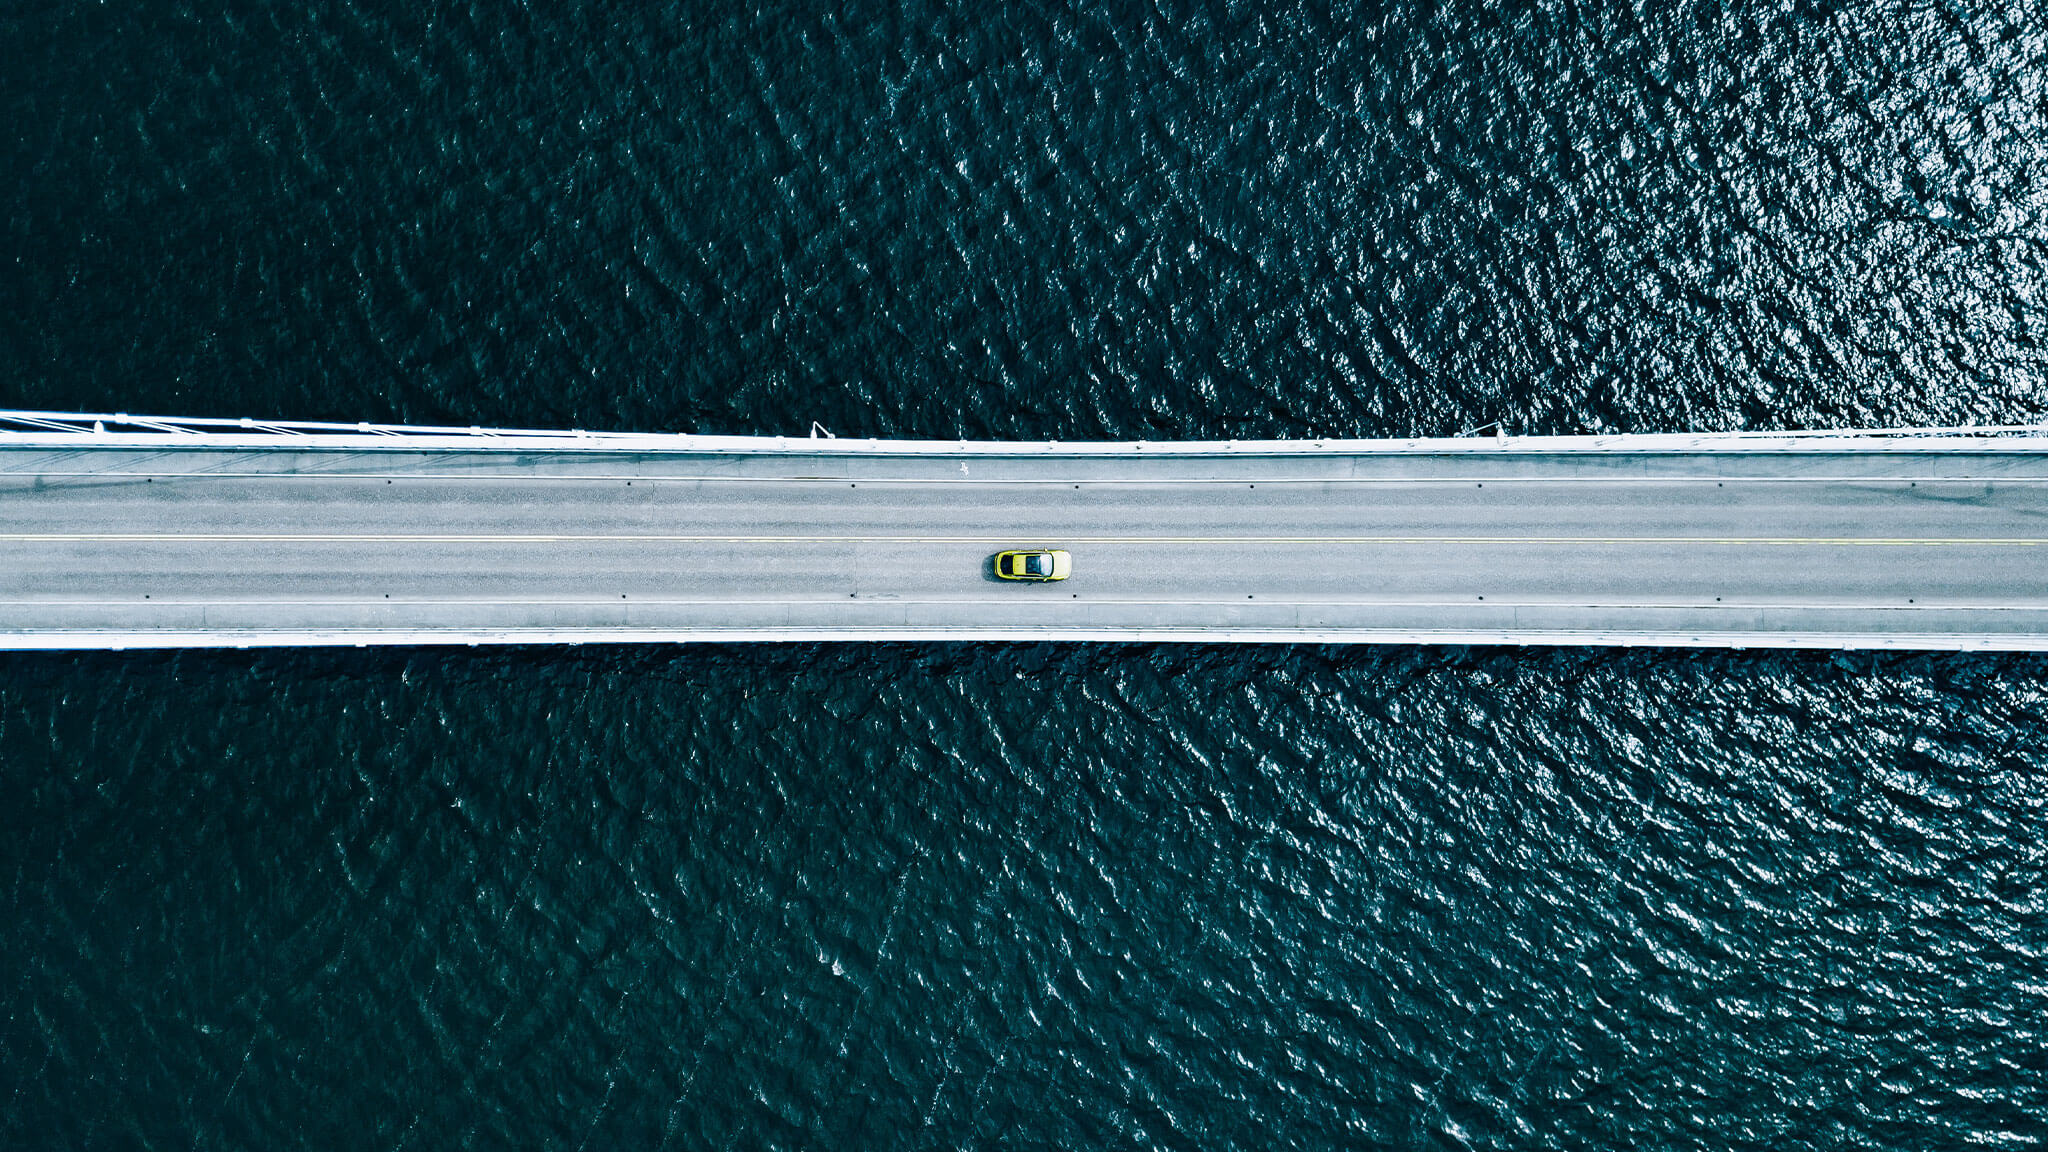 Overhead view of yellow car on a bridge